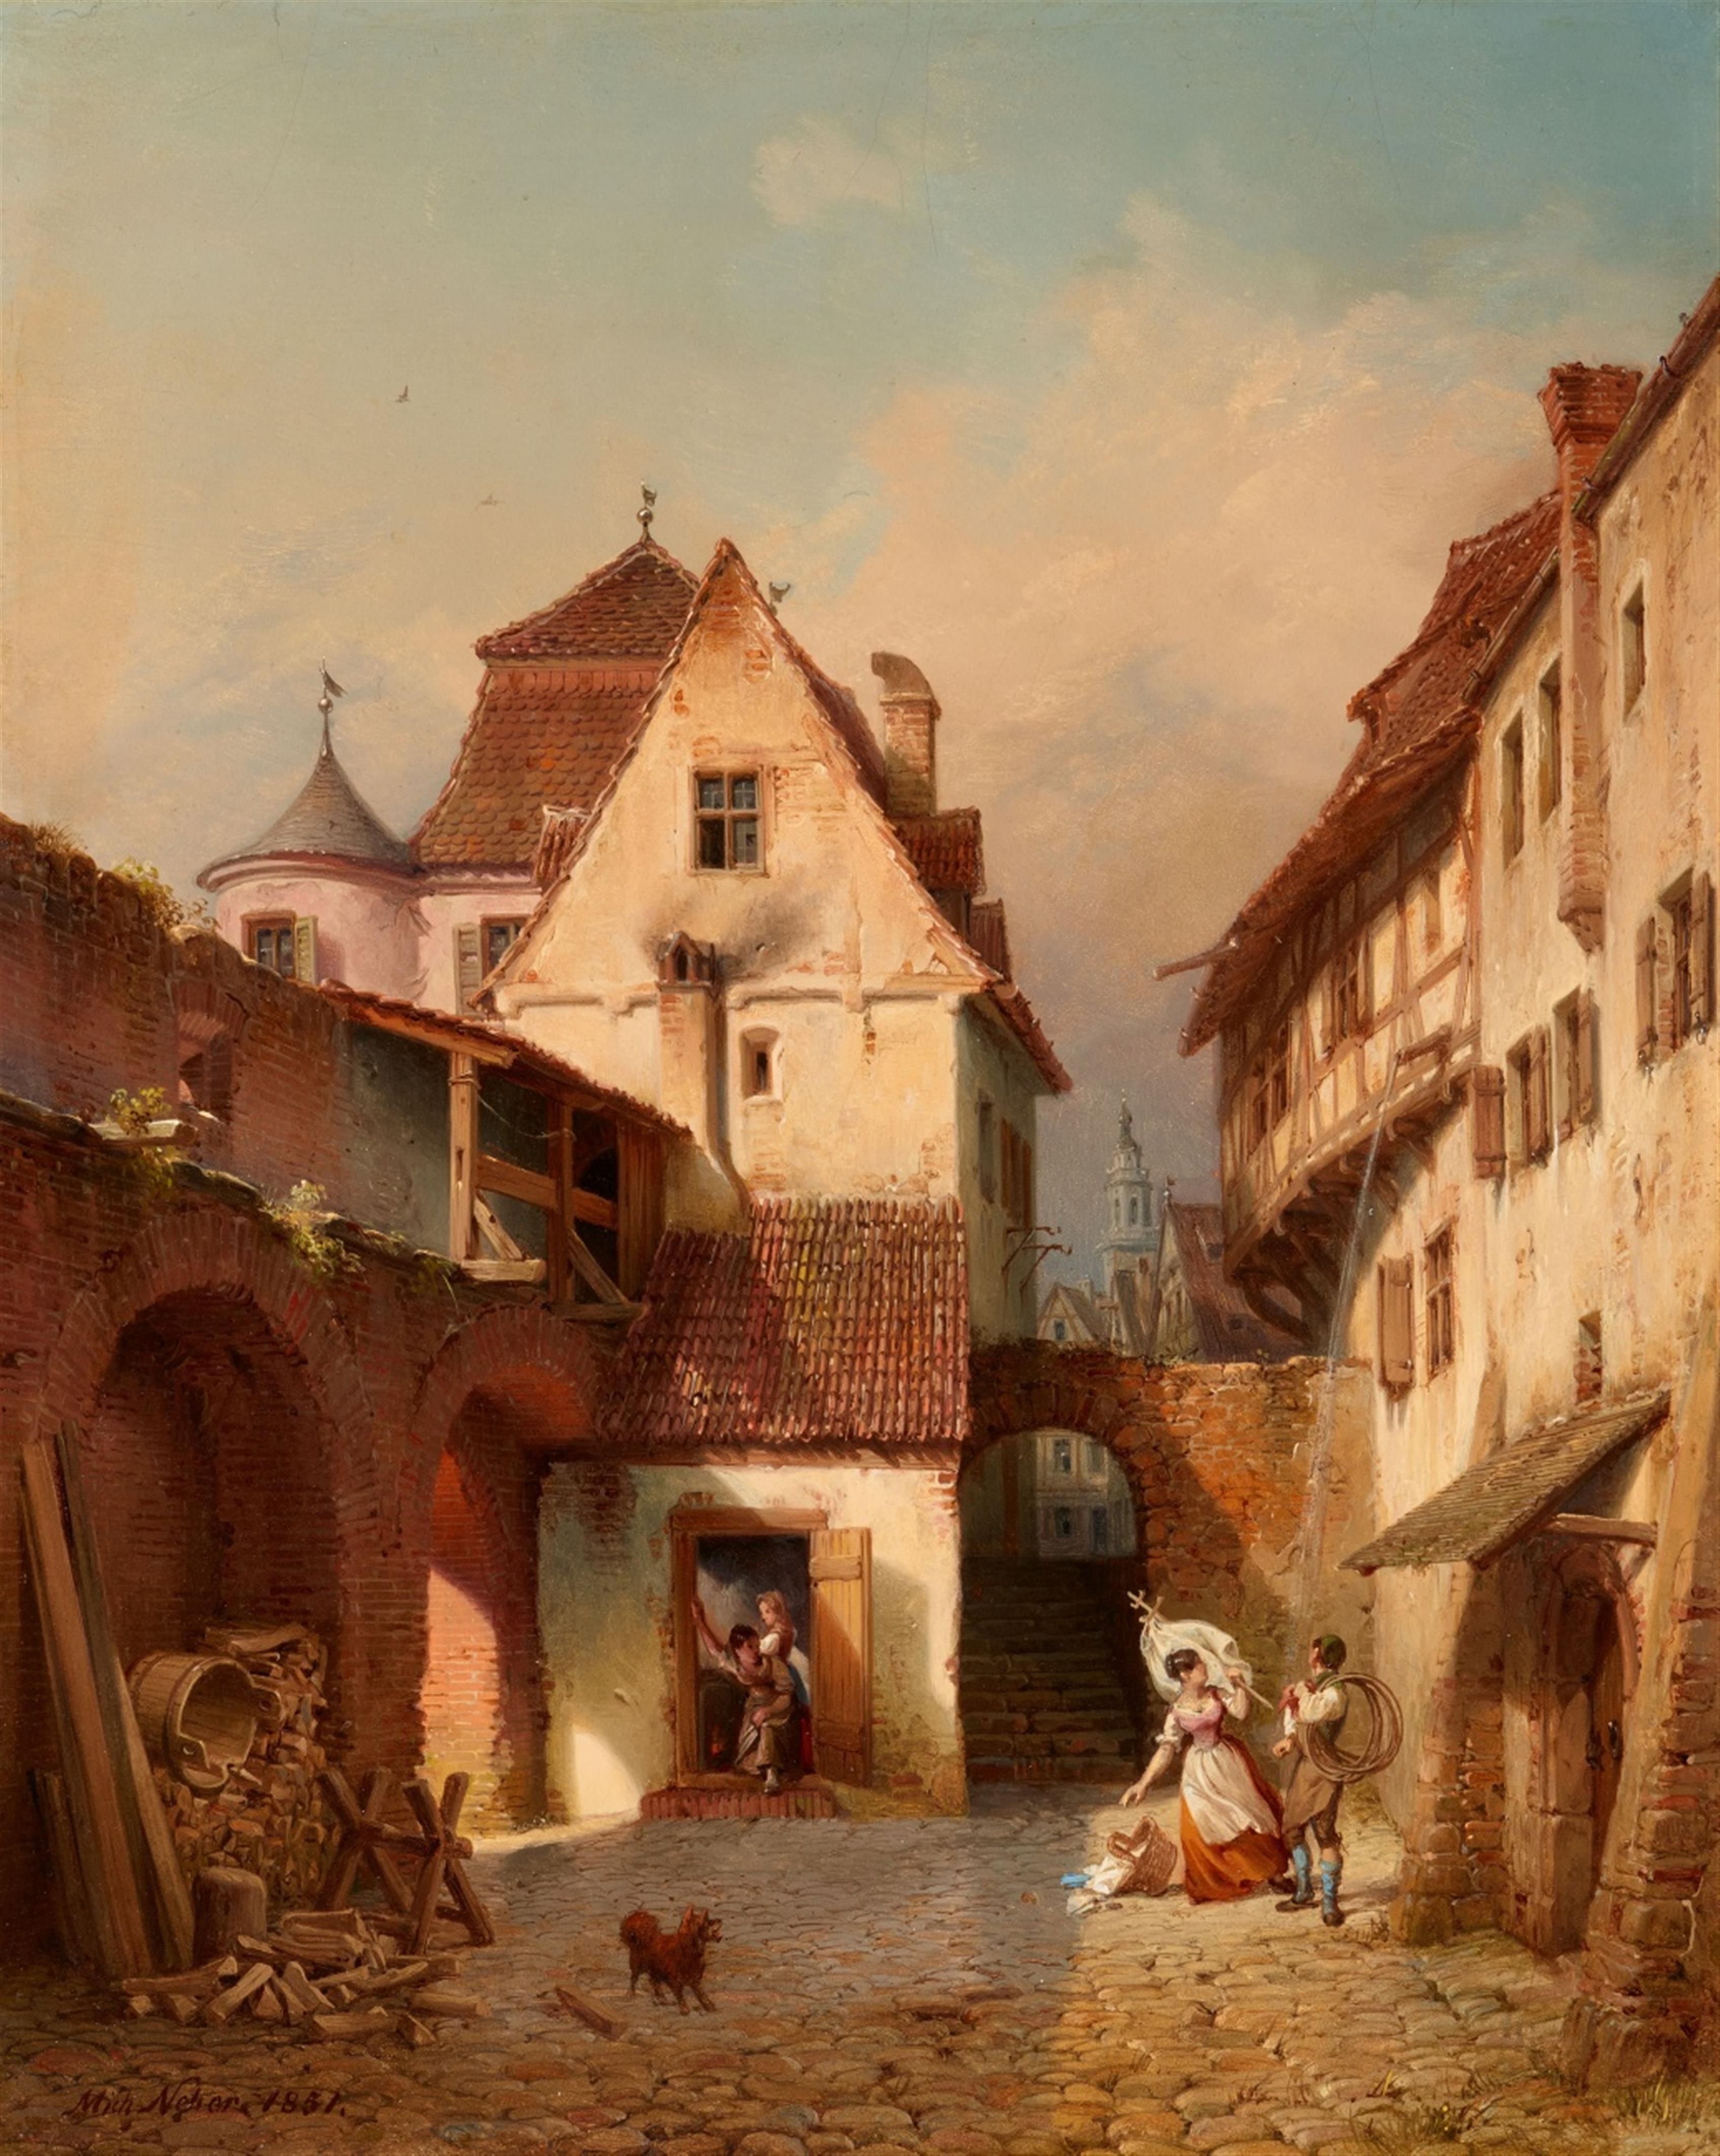 Michael Neher - Donauwörth. The Old City Walls with a View of the Holy Cross Church - image-1